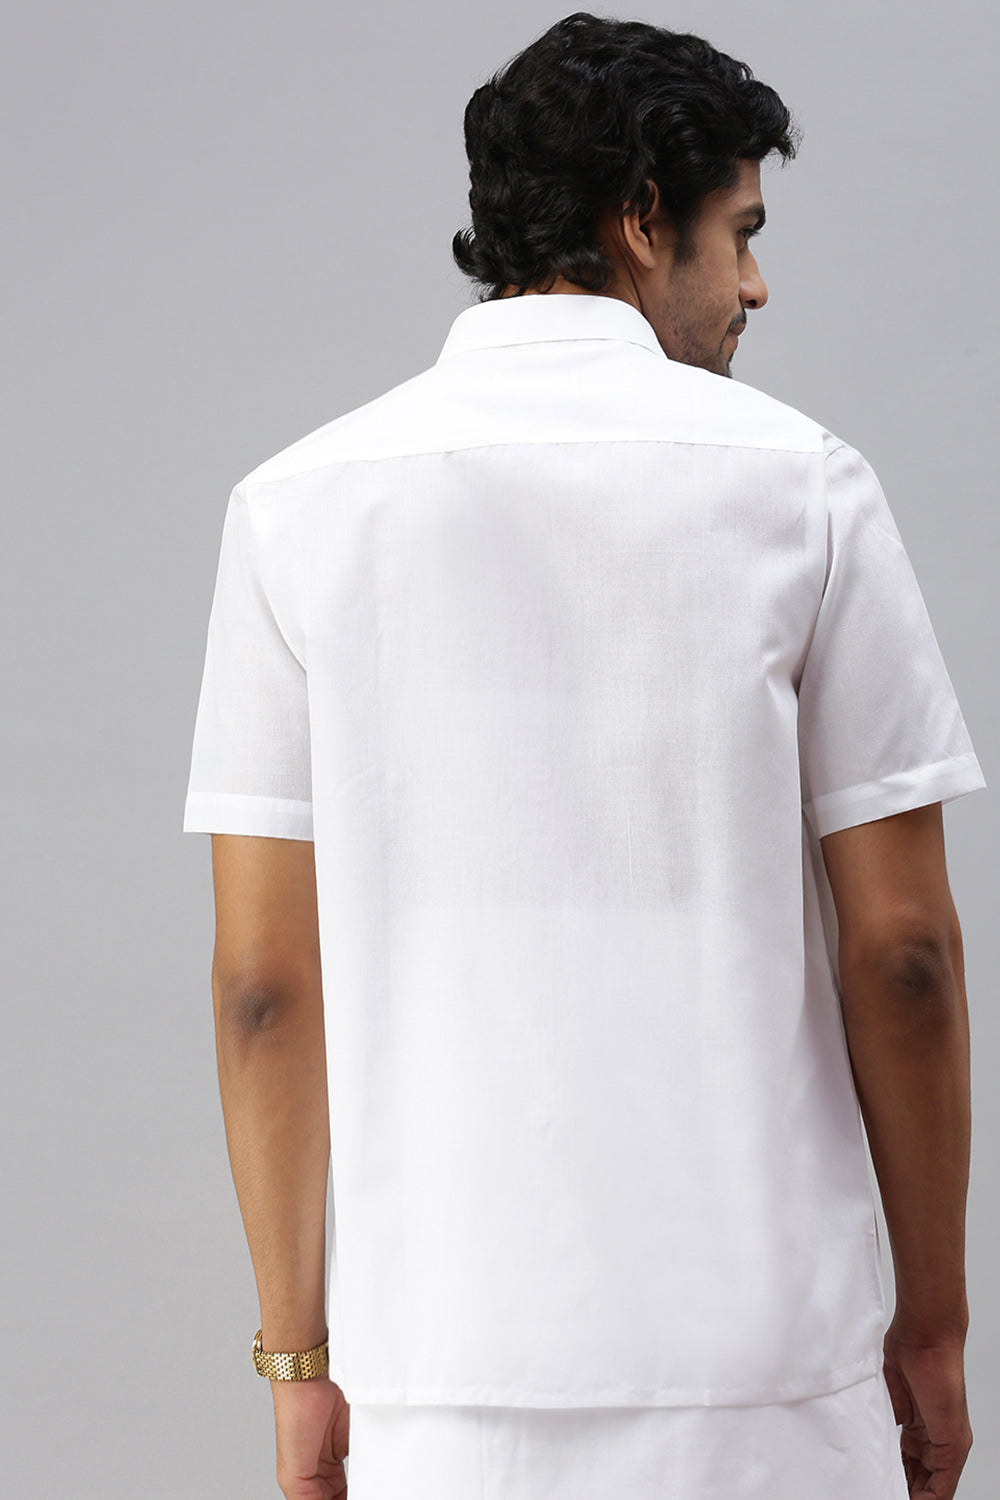 Mens 100% Cotton Half Sleeves White Shirt Justice White -Back view